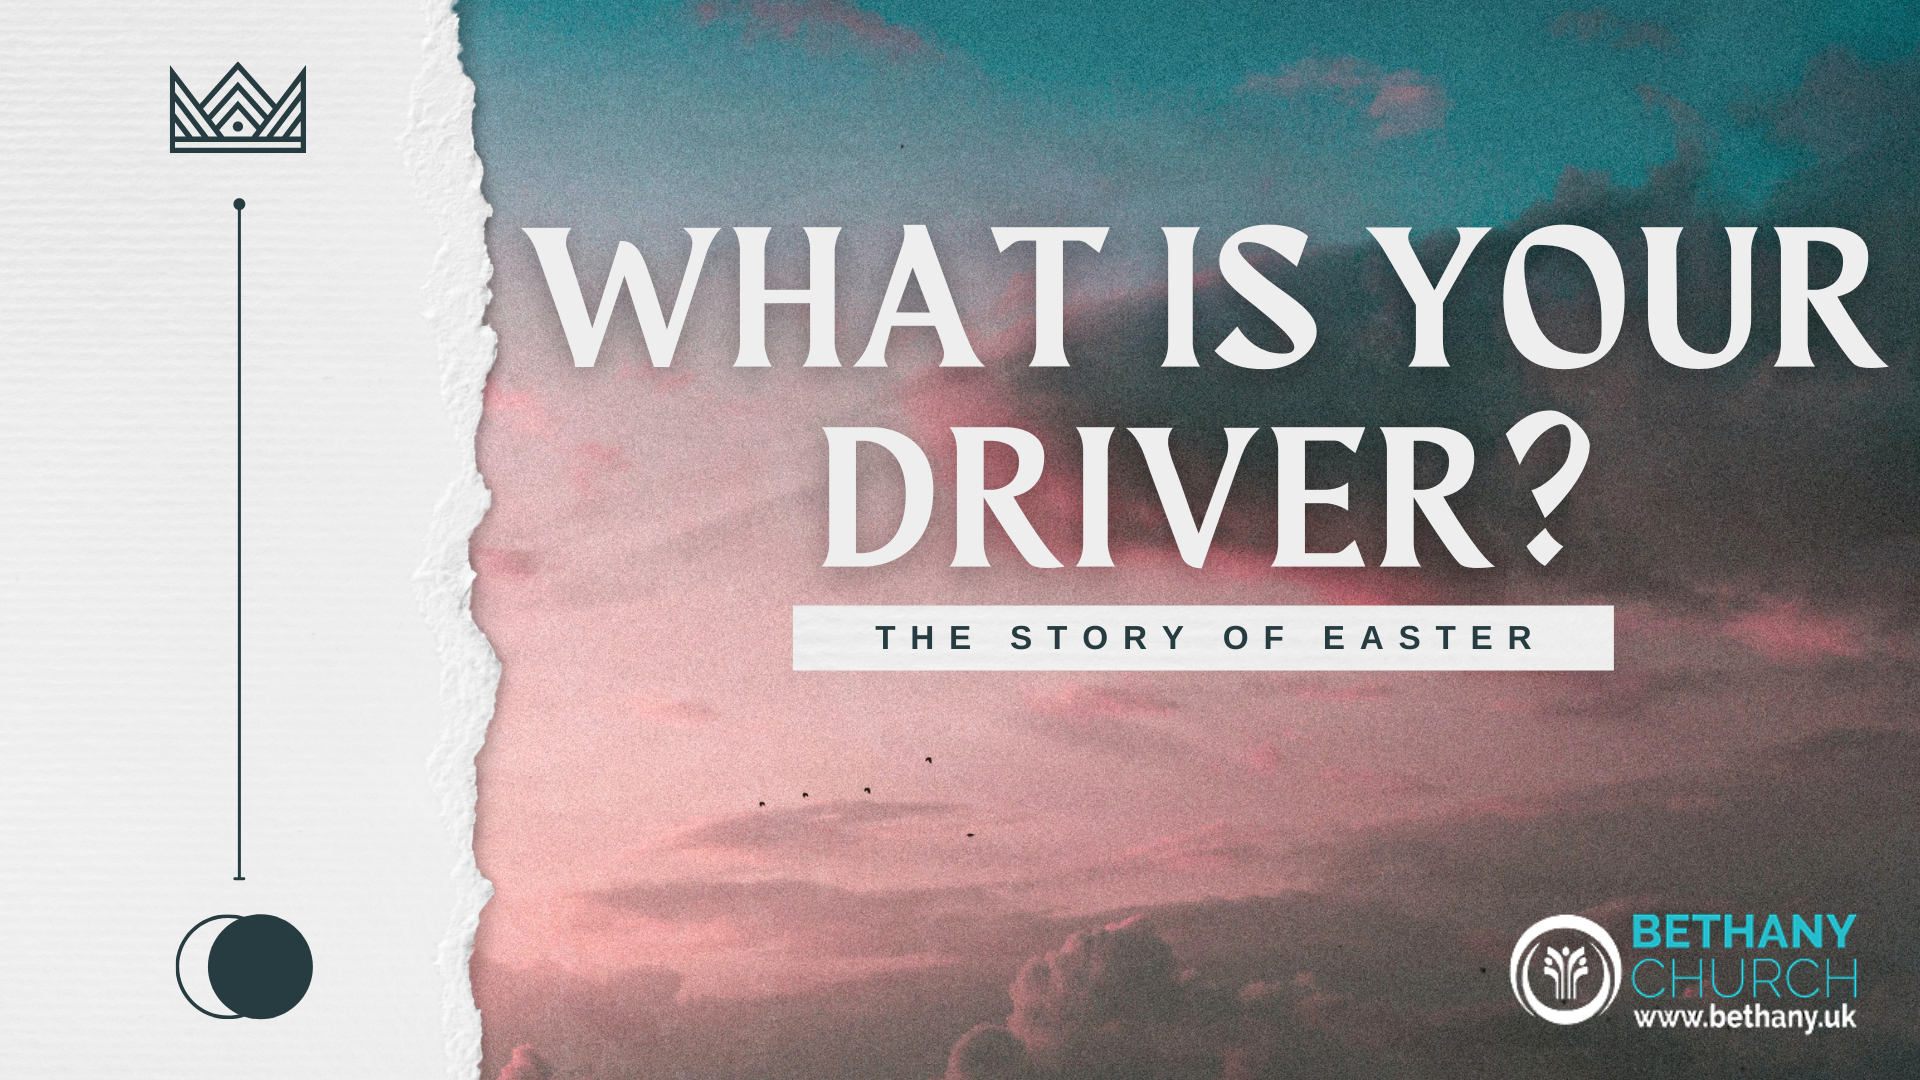 Easter story at Bethany Church